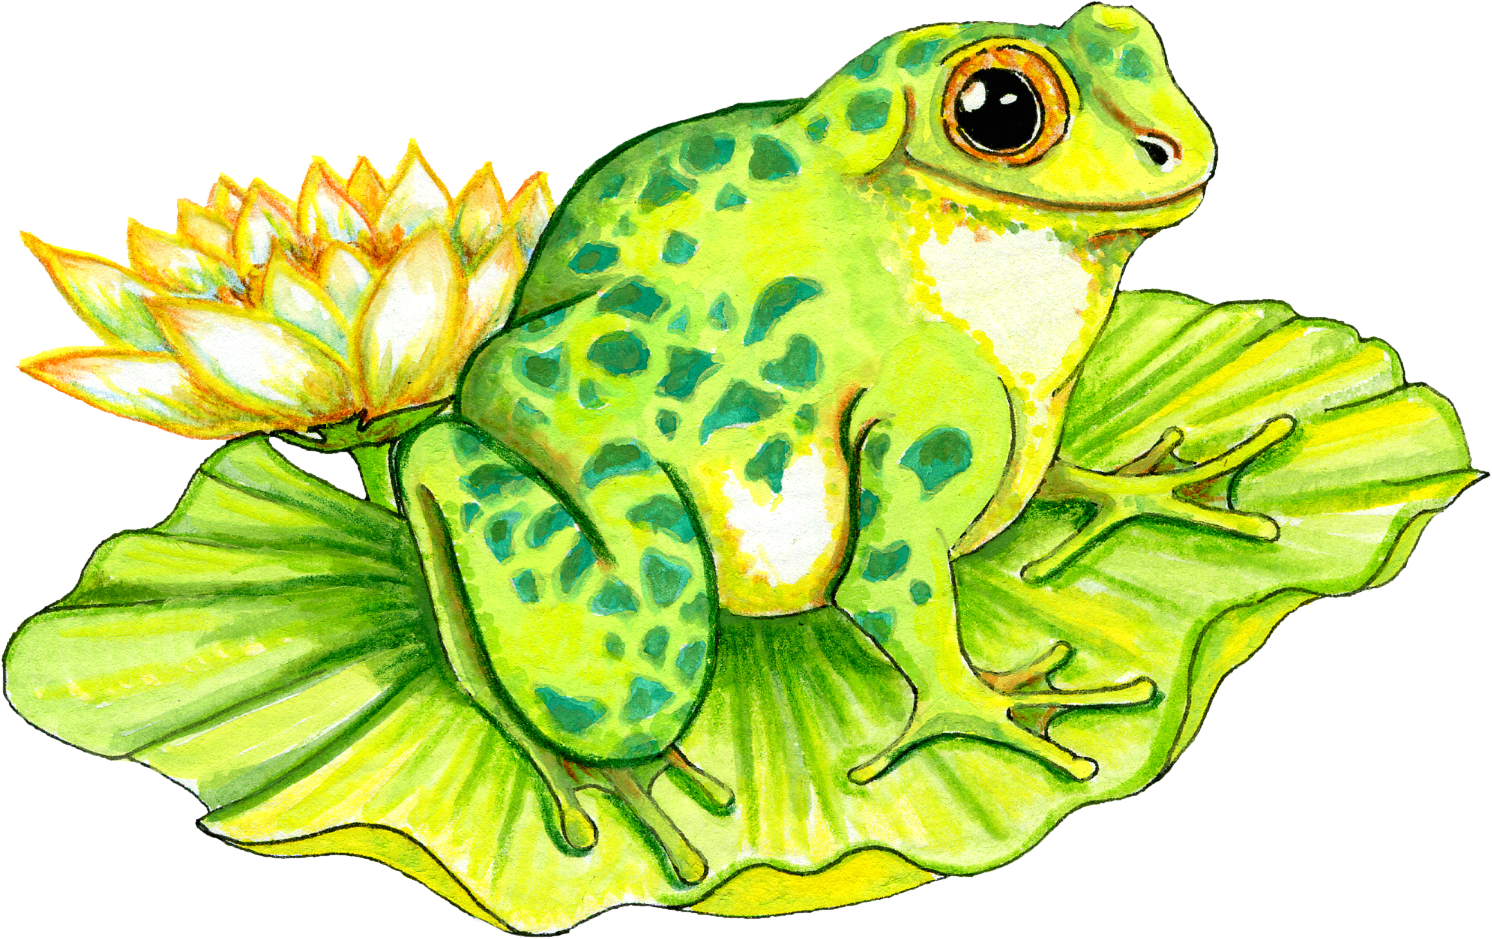 Single clipart lily pad #3